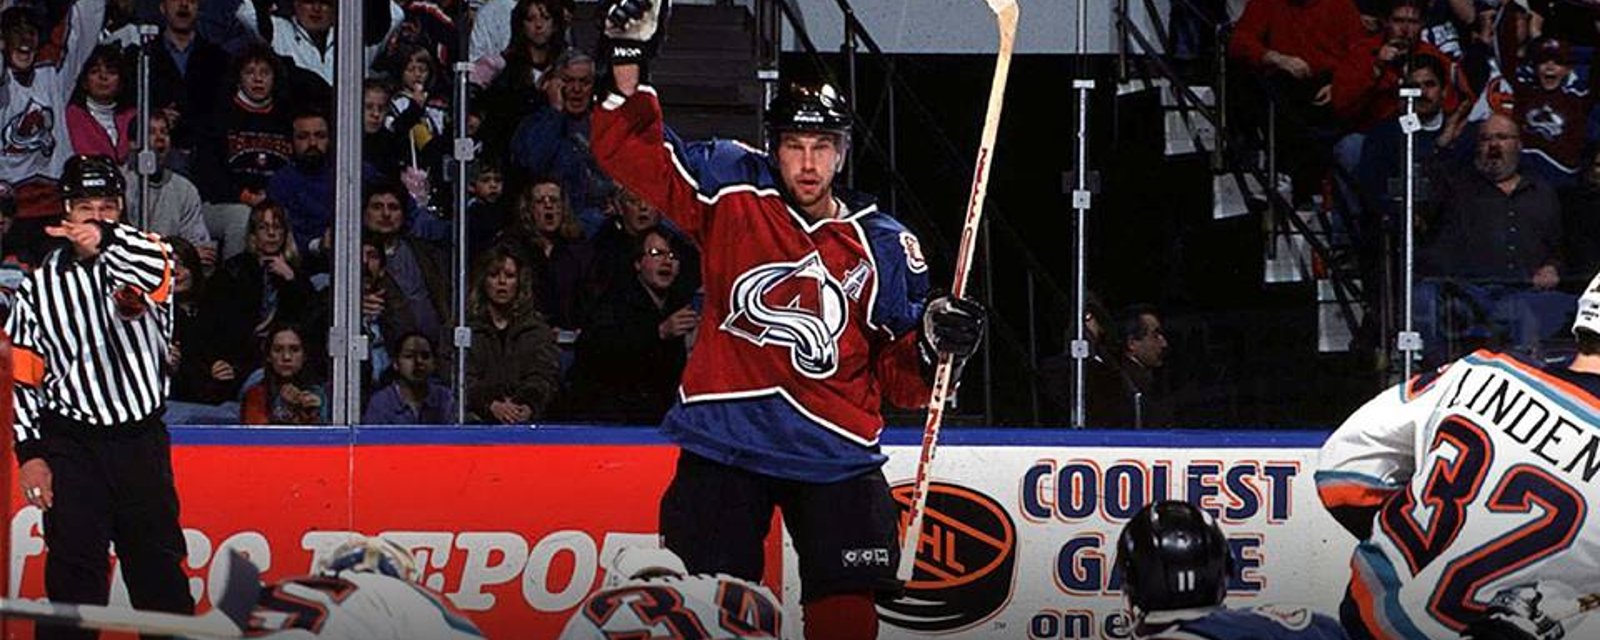 Report: Hall of Fame teammate blasts Sakic and Avs for handling of Duchene situation